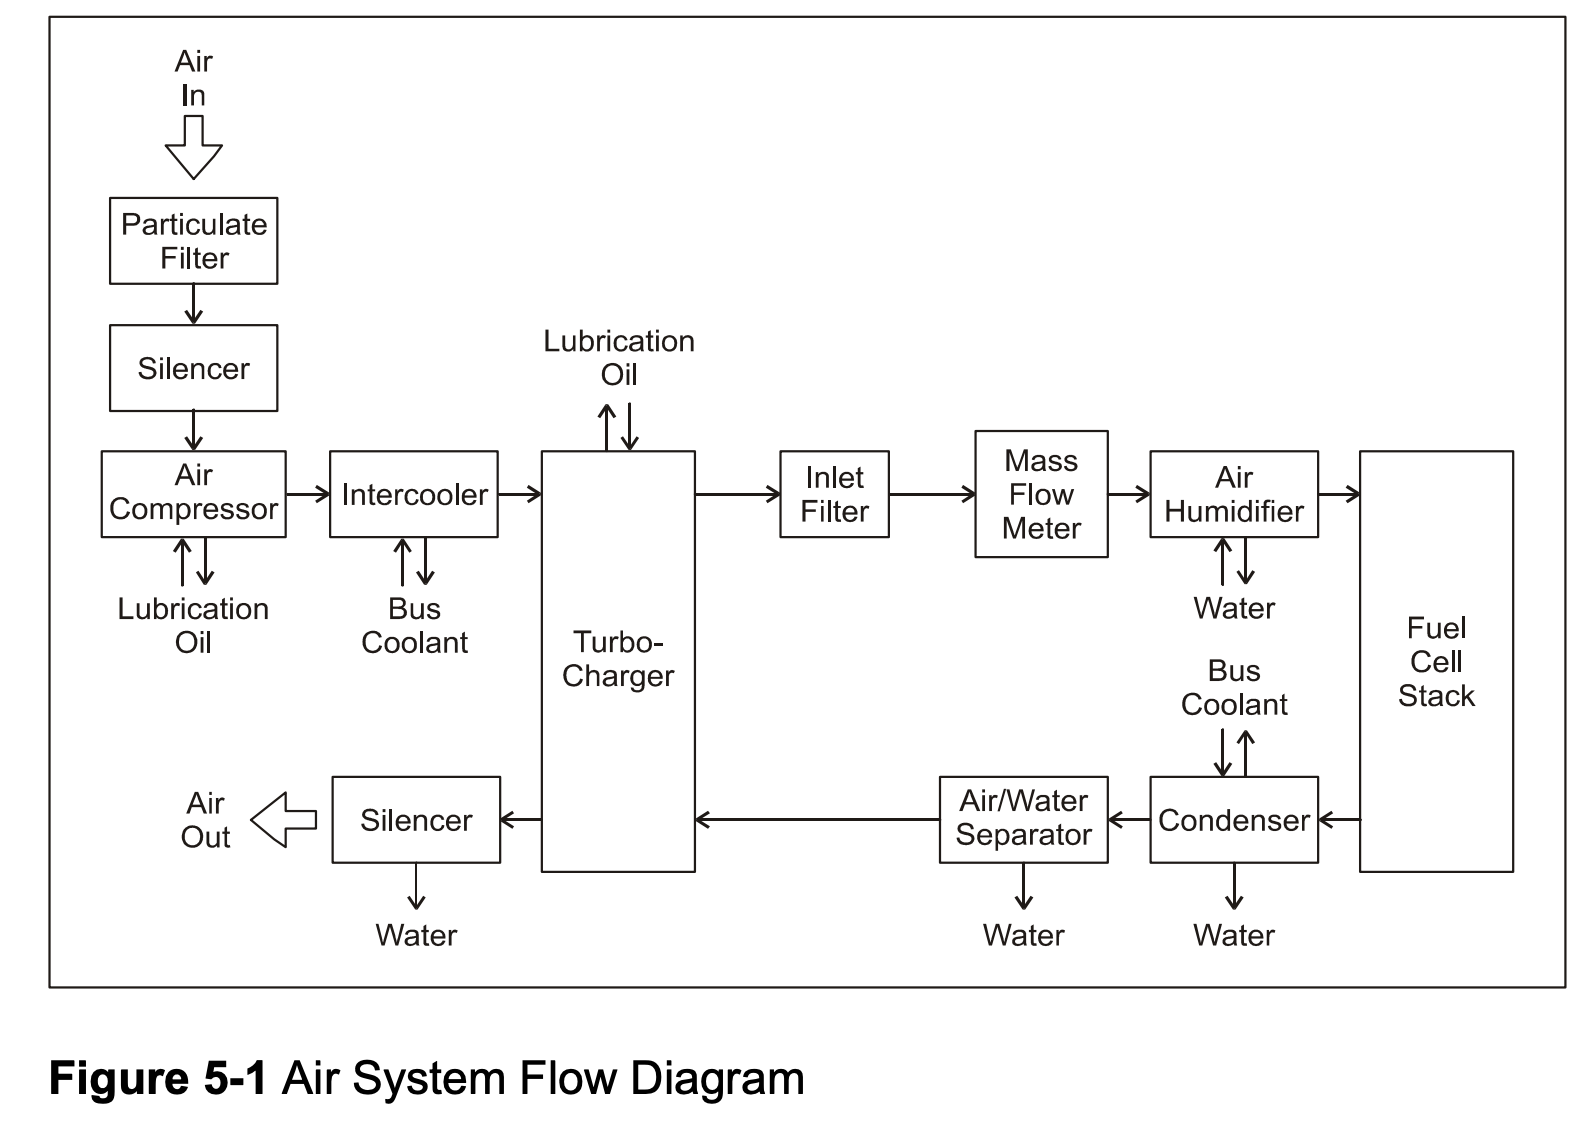 Schematic of just air management system for fuel cell vehicle courtesy US DOE